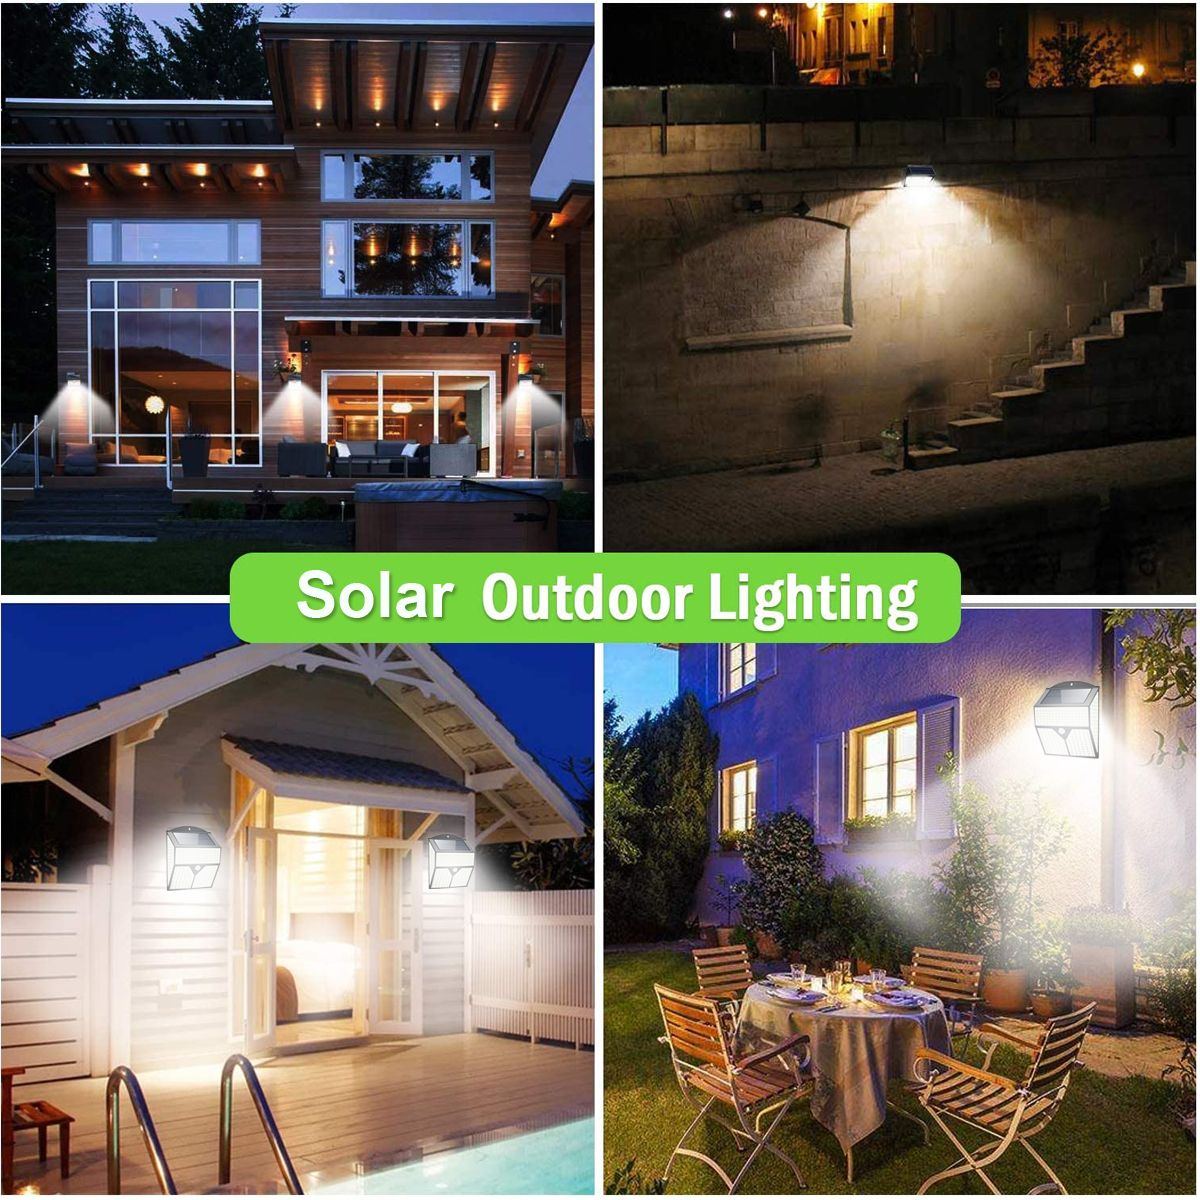 318LED-Solar-Light-Infrared-Motion-Sensor-Garden-Security-Wall-Lamp-for-Outdoor-Yard-Patio-1735603